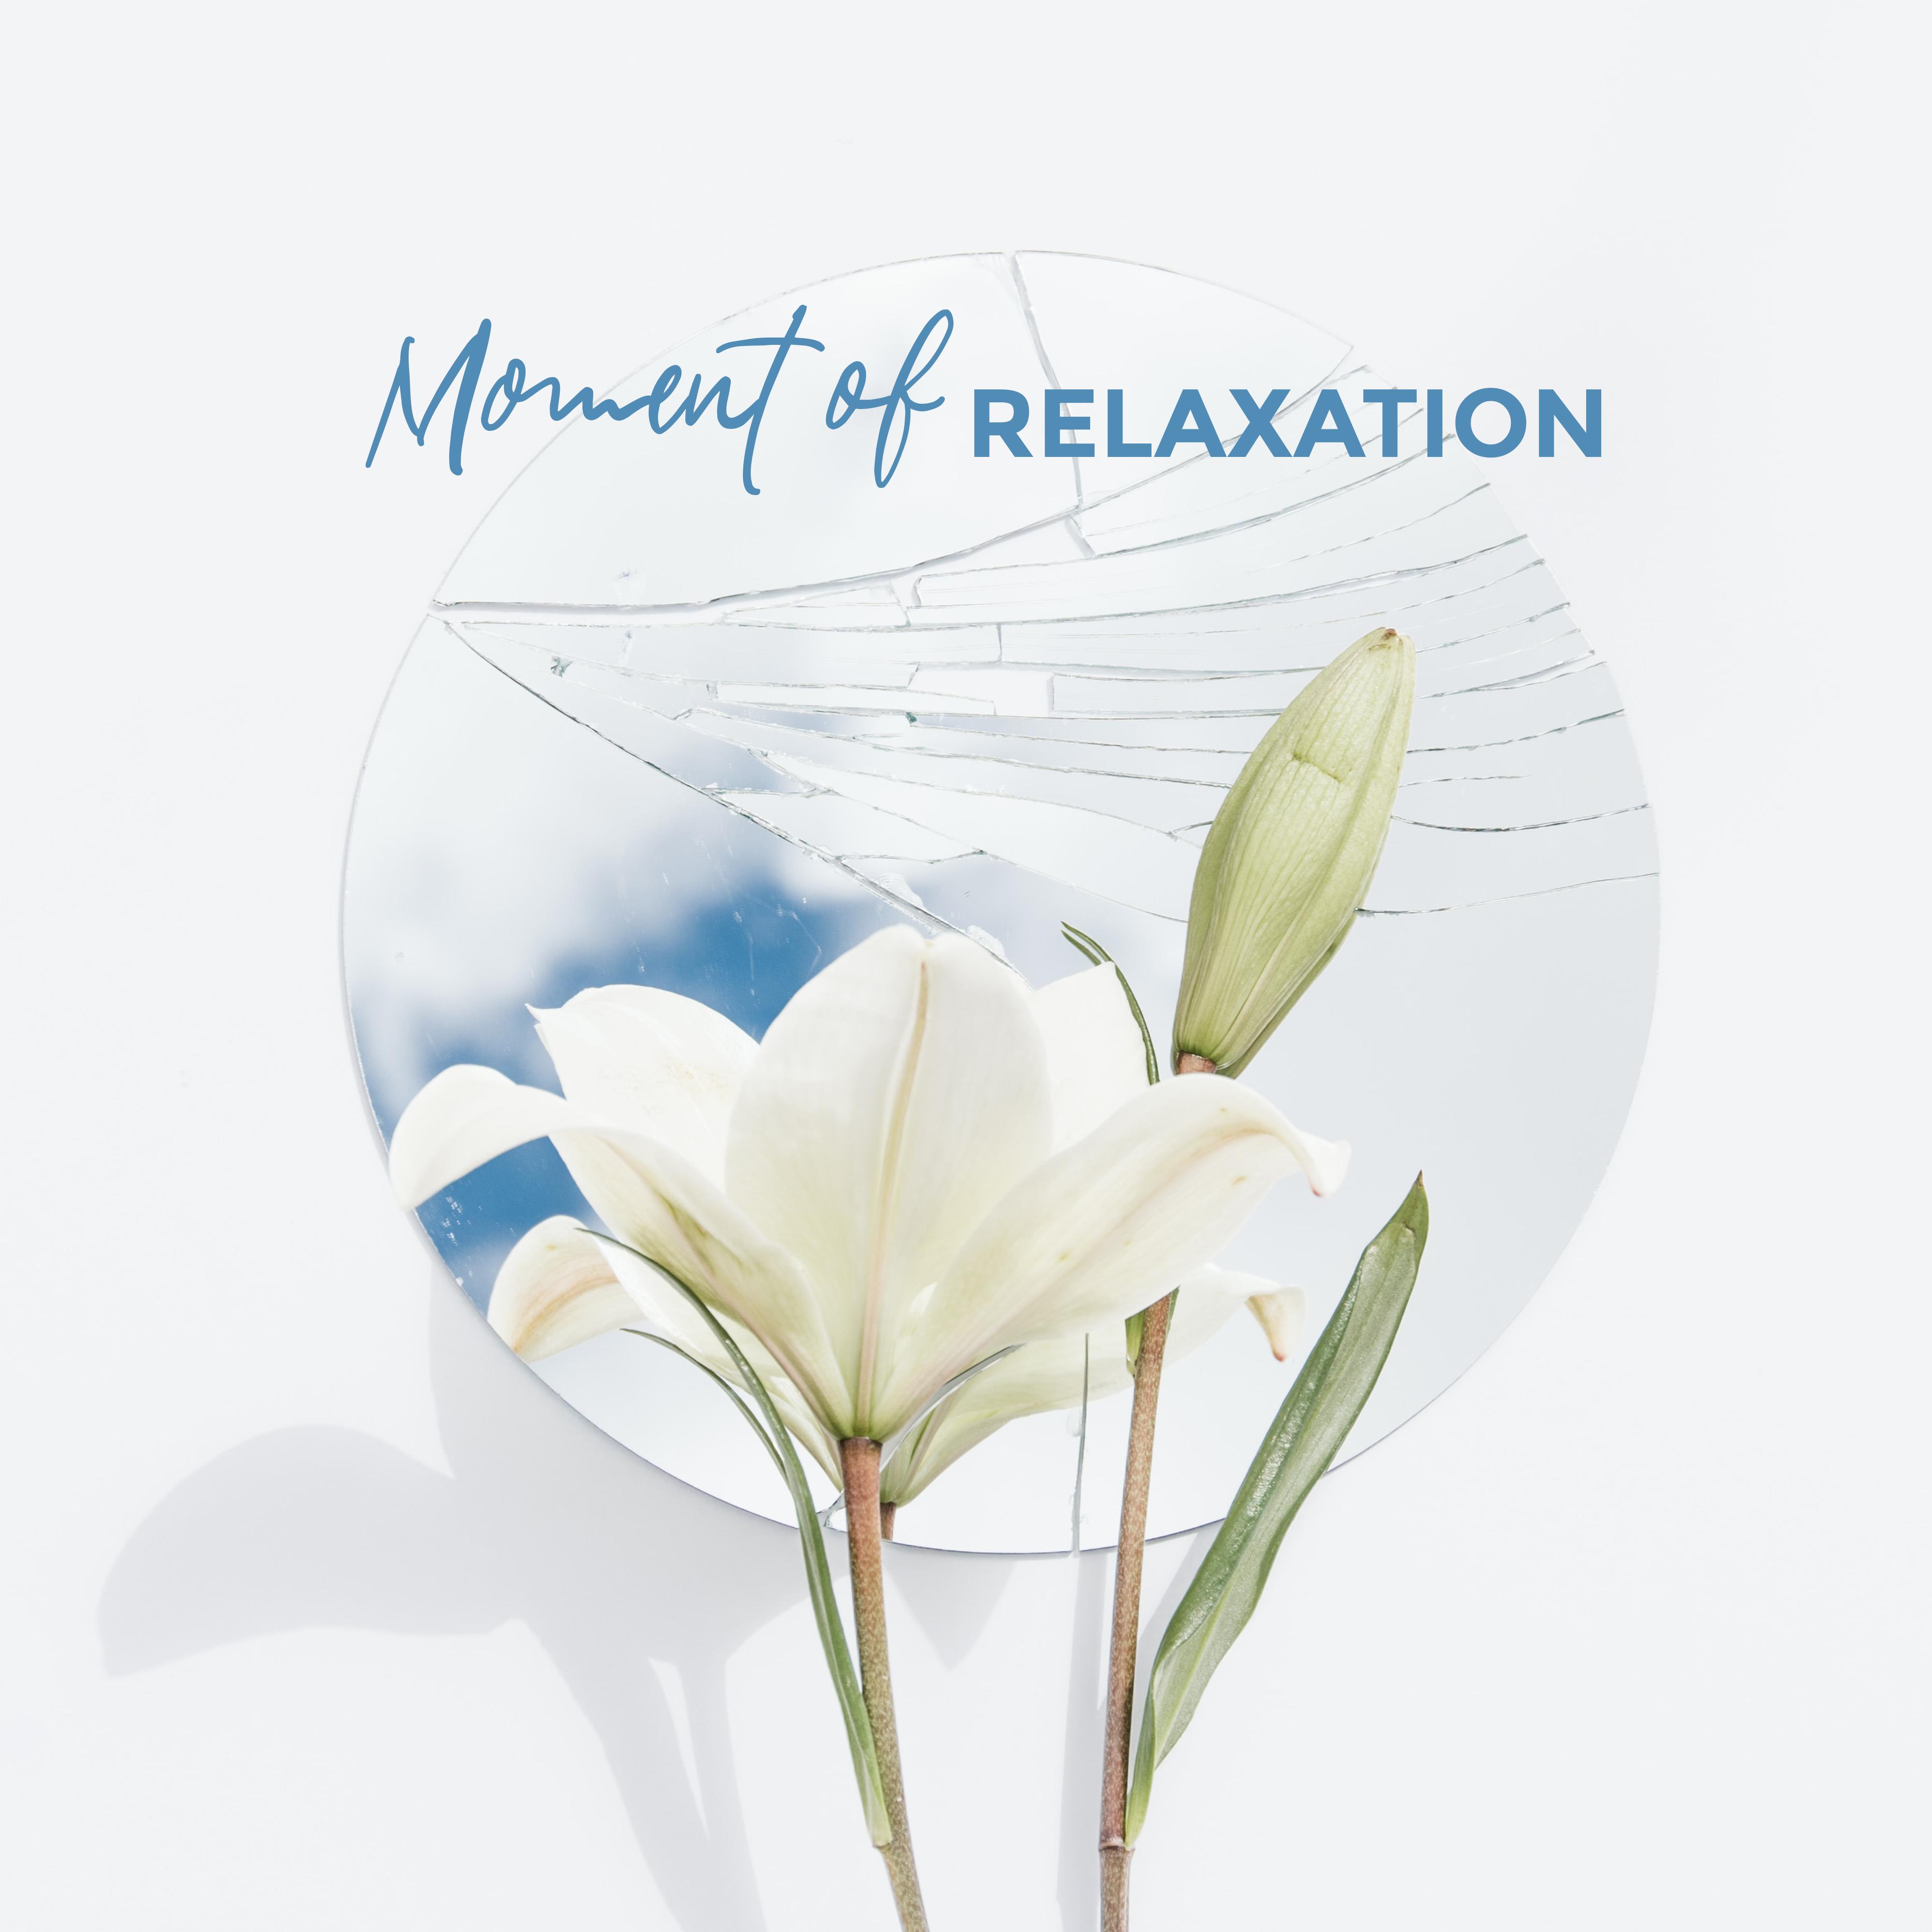 Moment of Relaxation - New Age Collection Created for Relaxation, Rest, Calmness and Tranquility